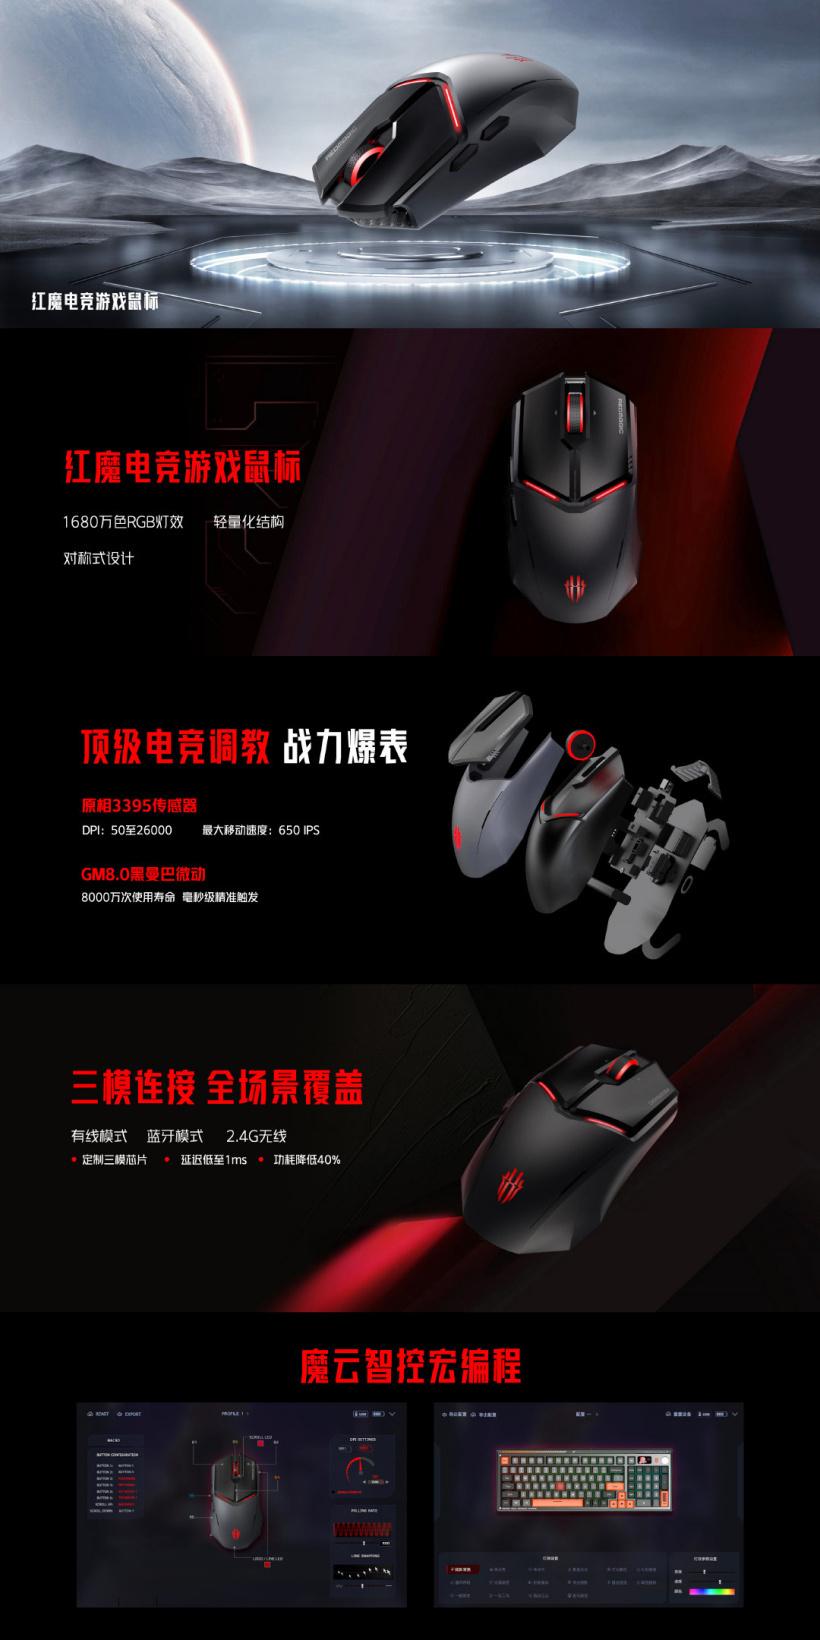 399 yuan, Nubia Red Magic e-sports mouse starts pre-sale: equipped with Original Photo 3395 sensor